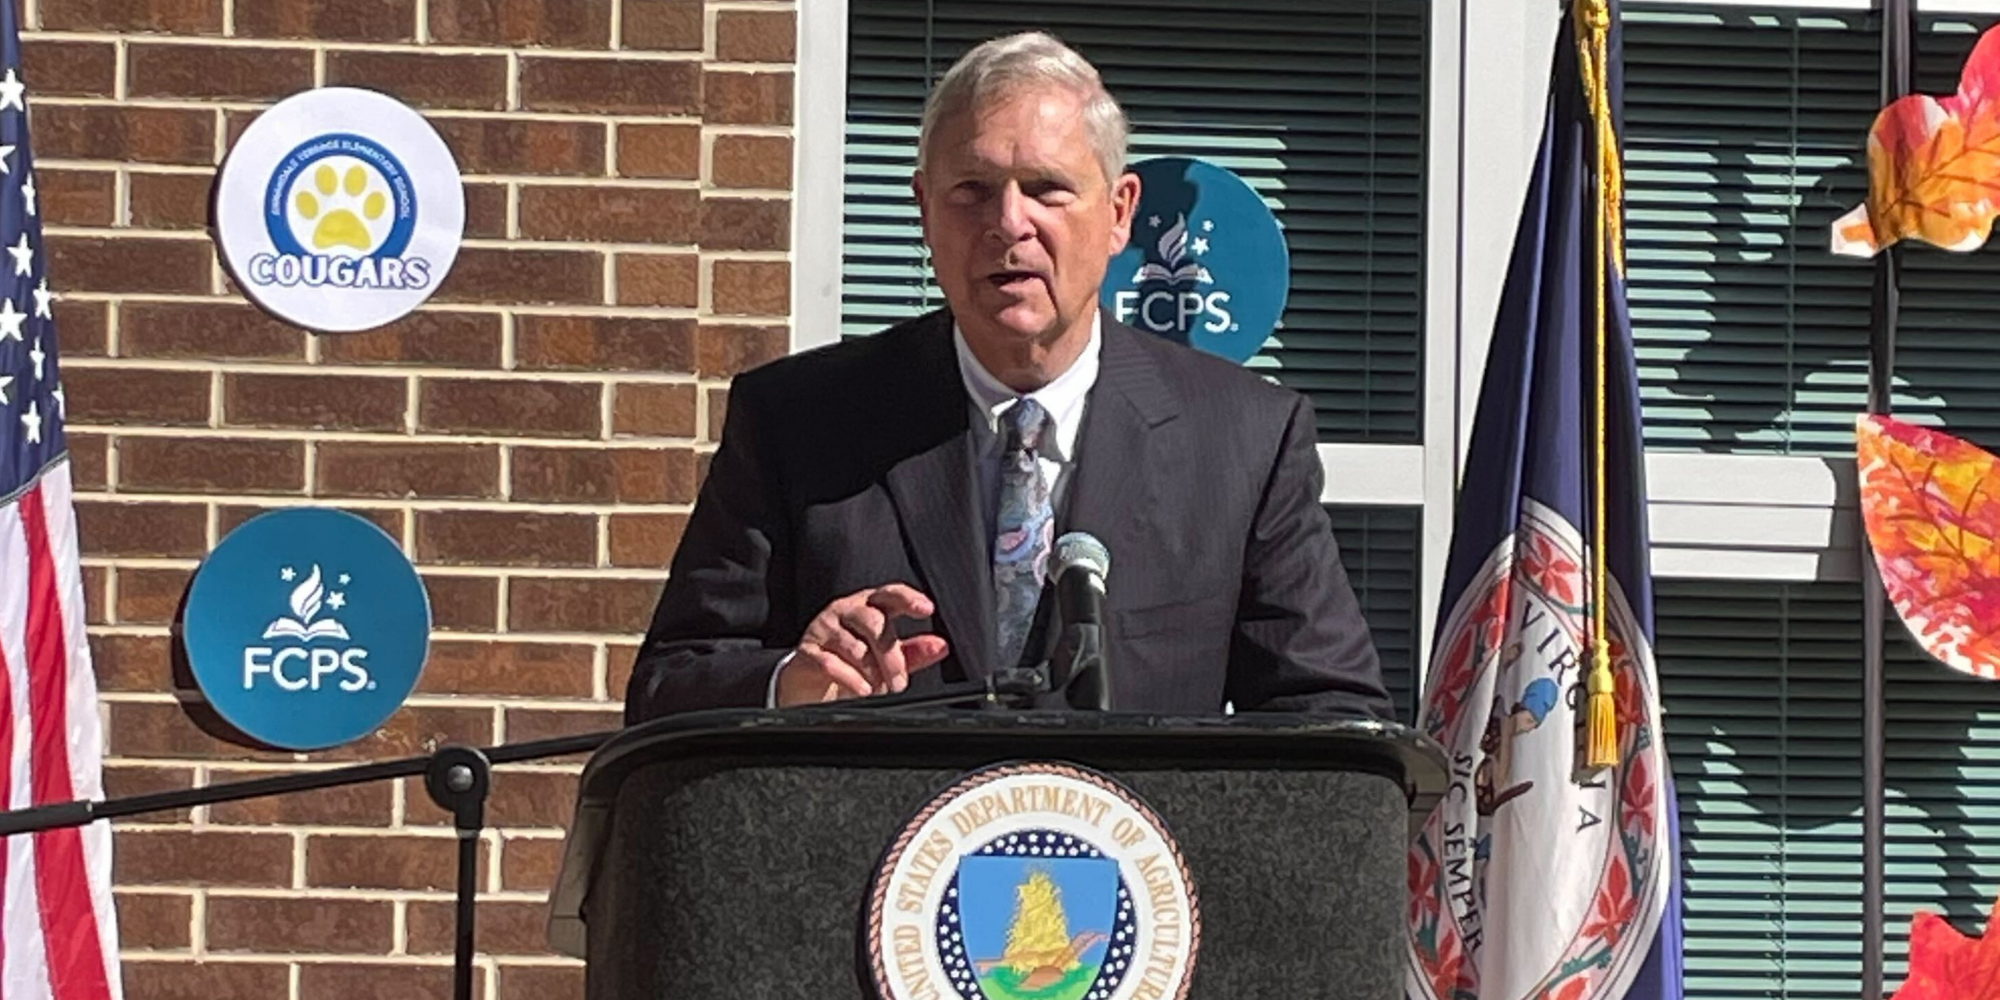 USDA Secretary Tom Vilsack, wearing a black suit and standing at a podium in front of a brick building, announces new grant opportunities during National School Lunch Week at Annandale Terrace Elementary School in Virginia, an important moment for school food policy.